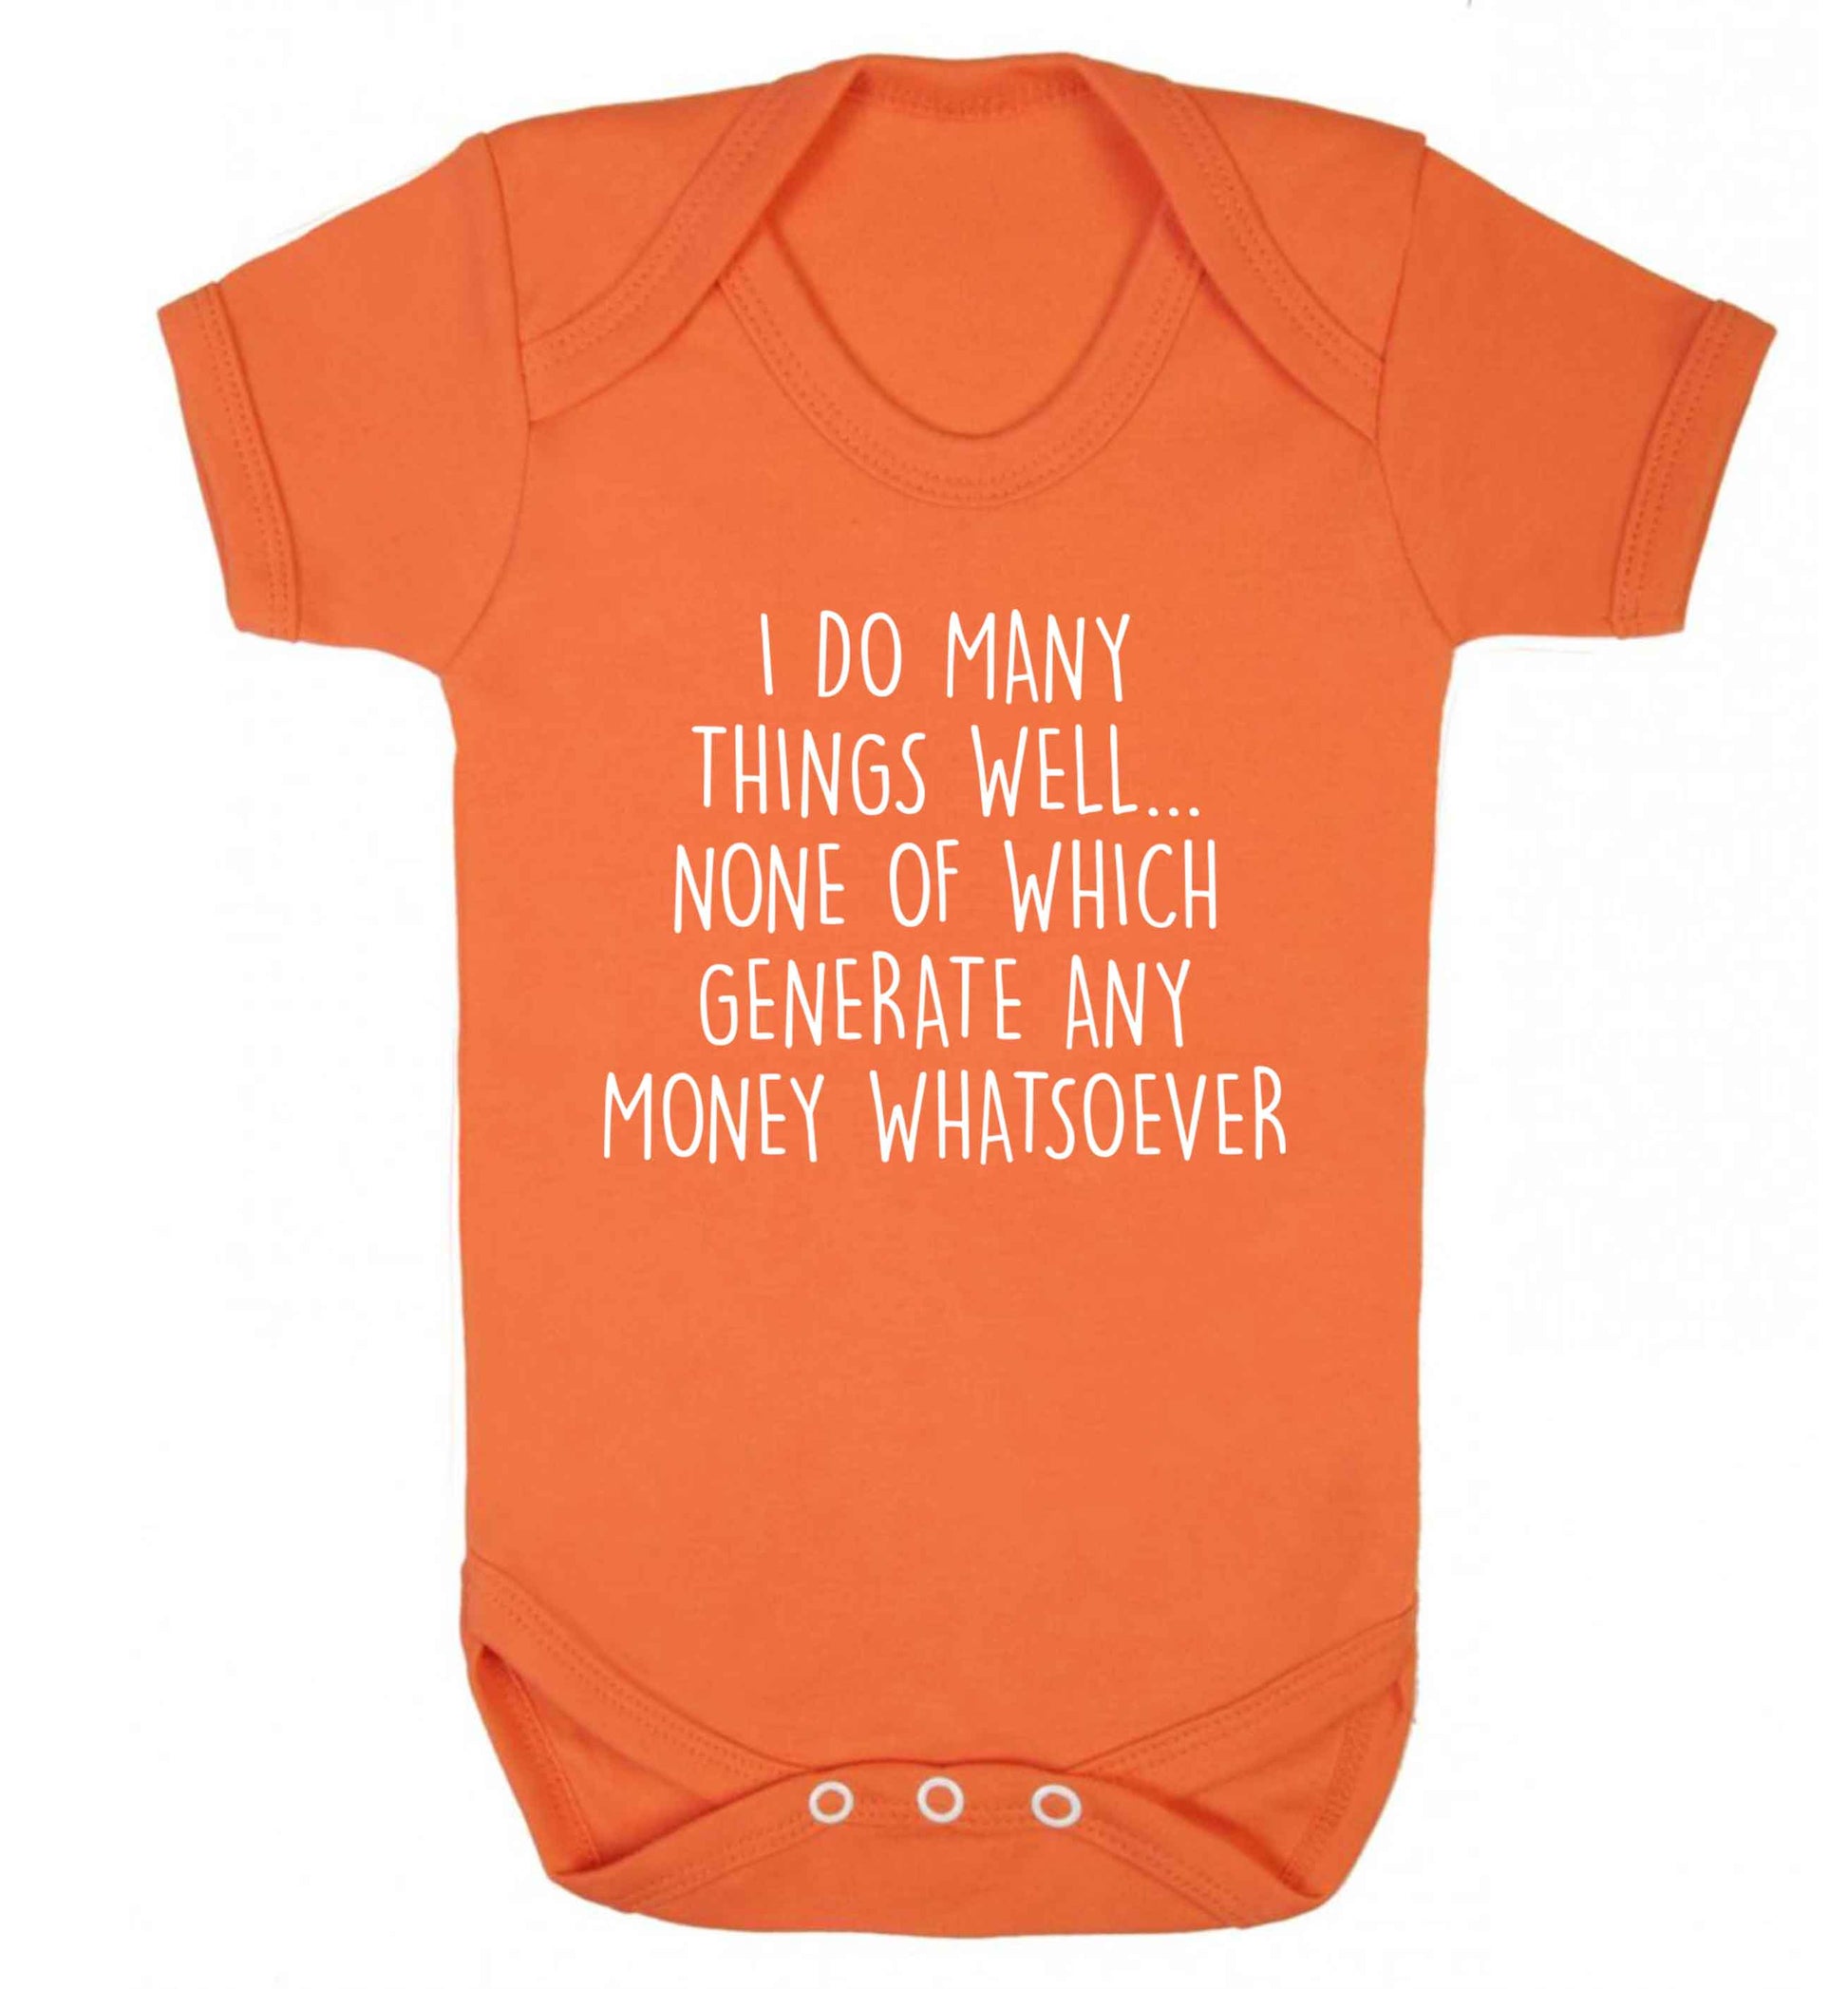 I do many things well none of which generate income Baby Vest orange 18-24 months